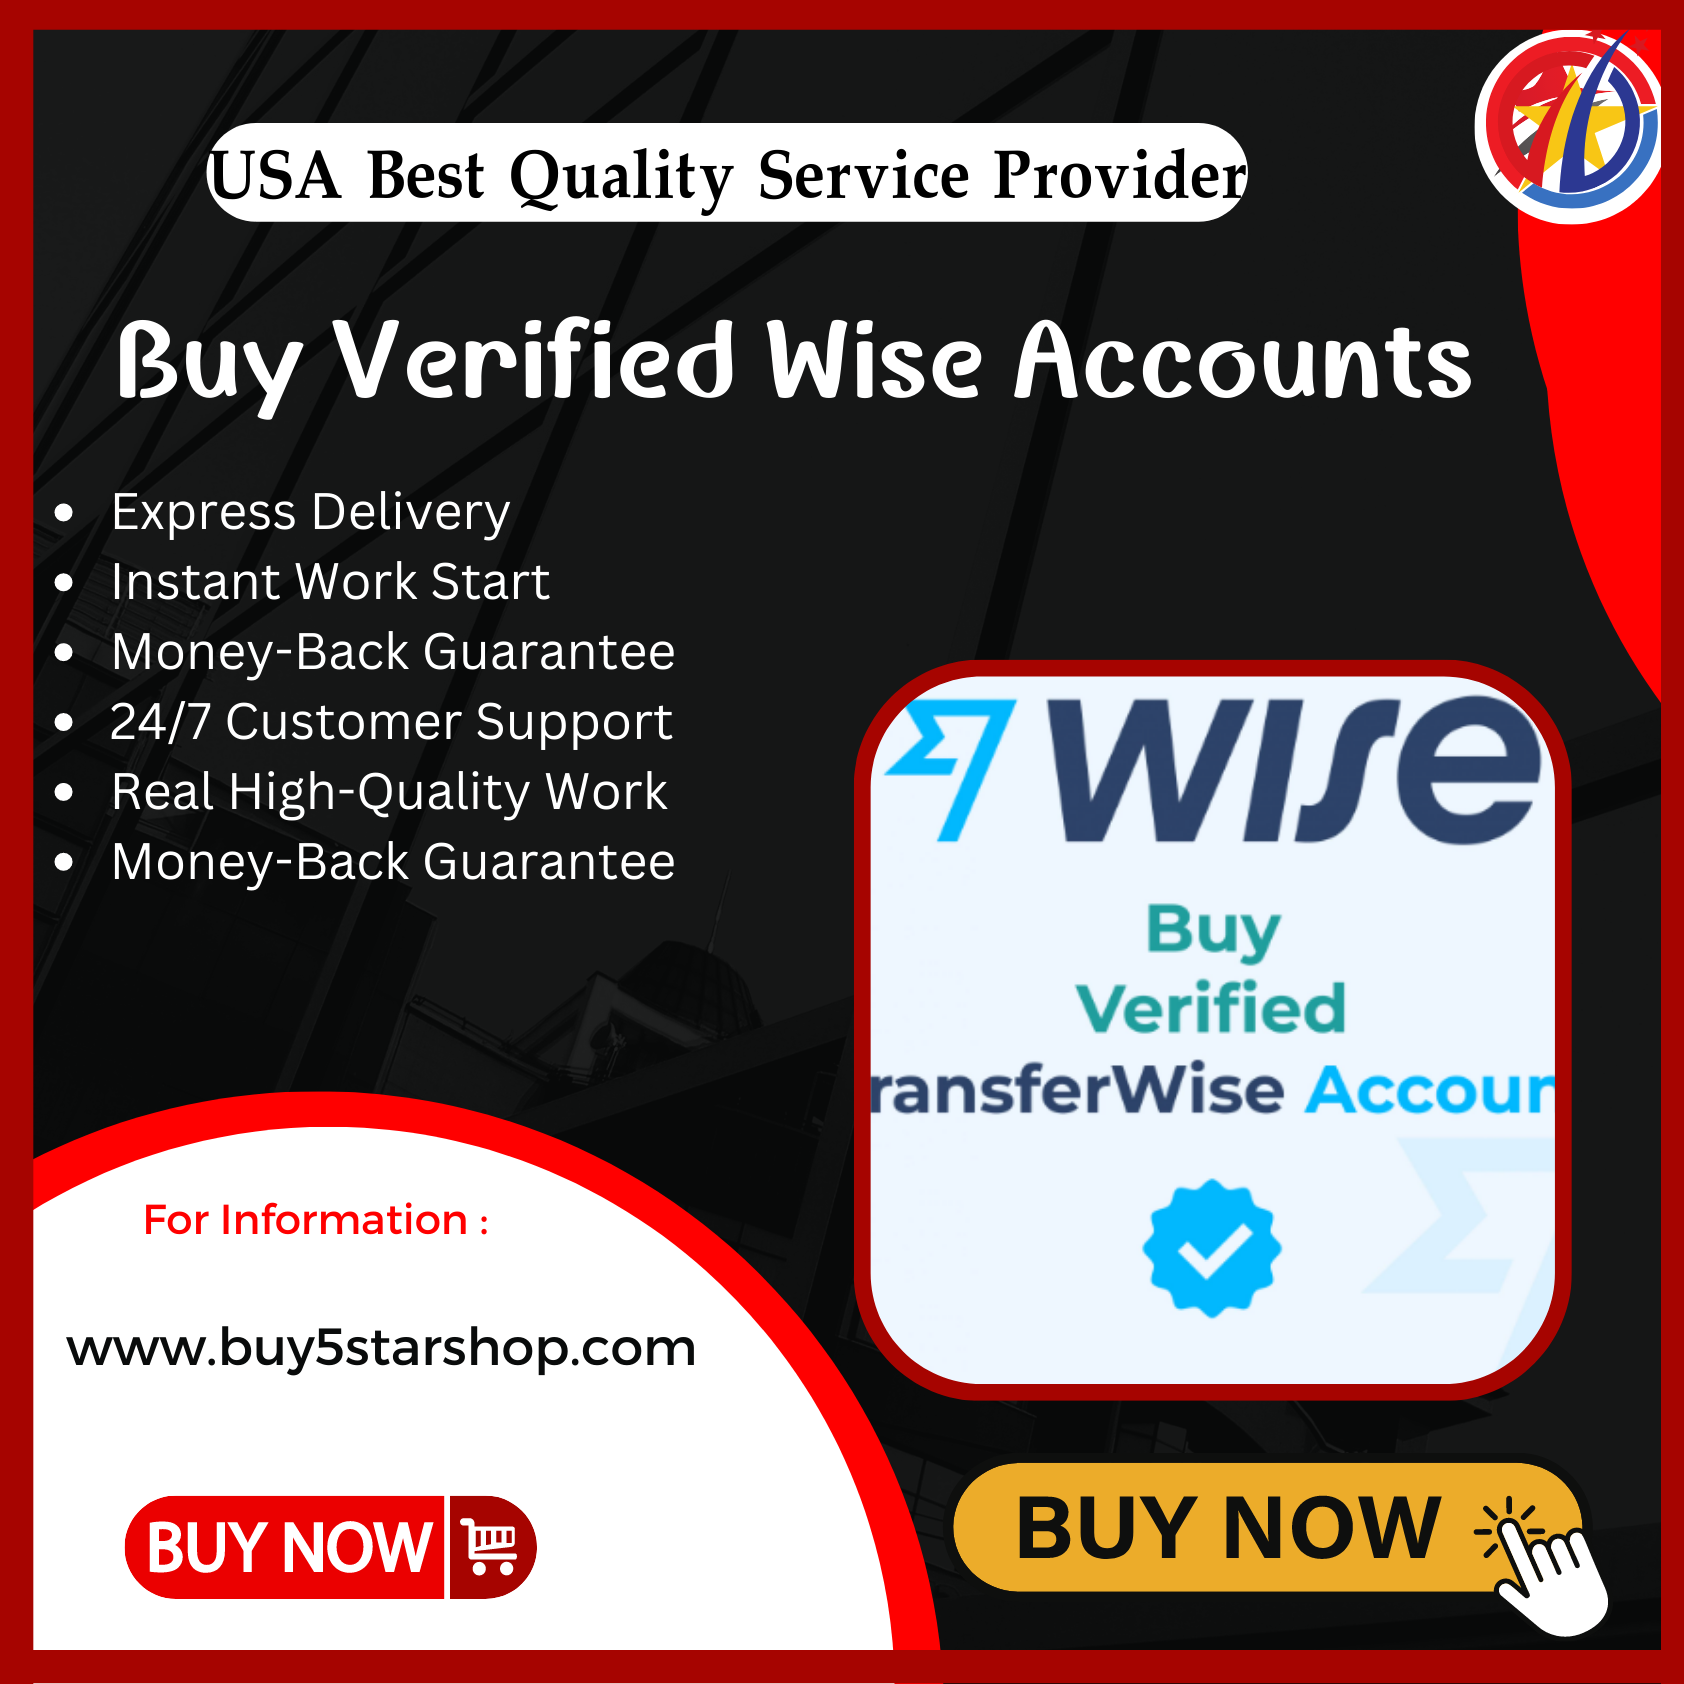 Buy Verified TransferWise Account (Wise)